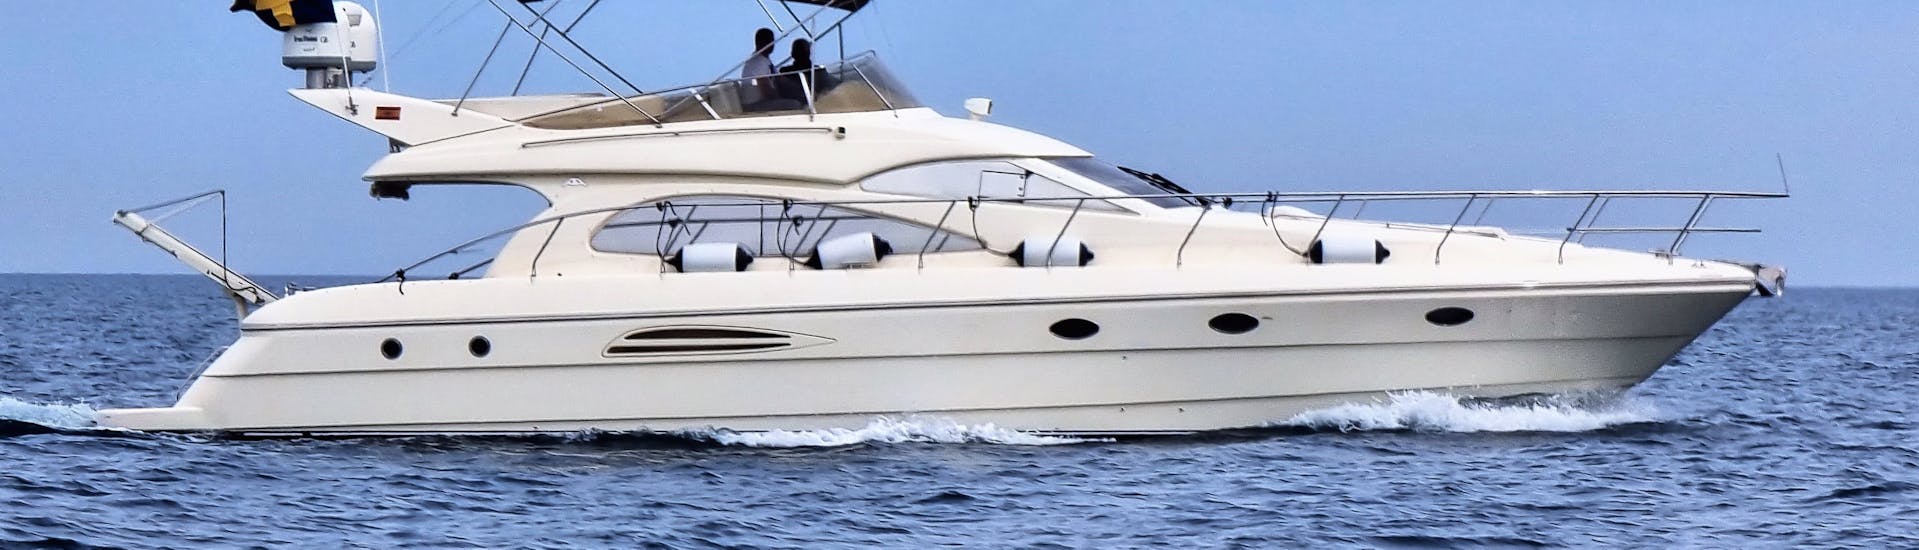 Picture of Mayte V, a Luxury Boat Rental in Torrevieja with Skipper (up to 9 people).